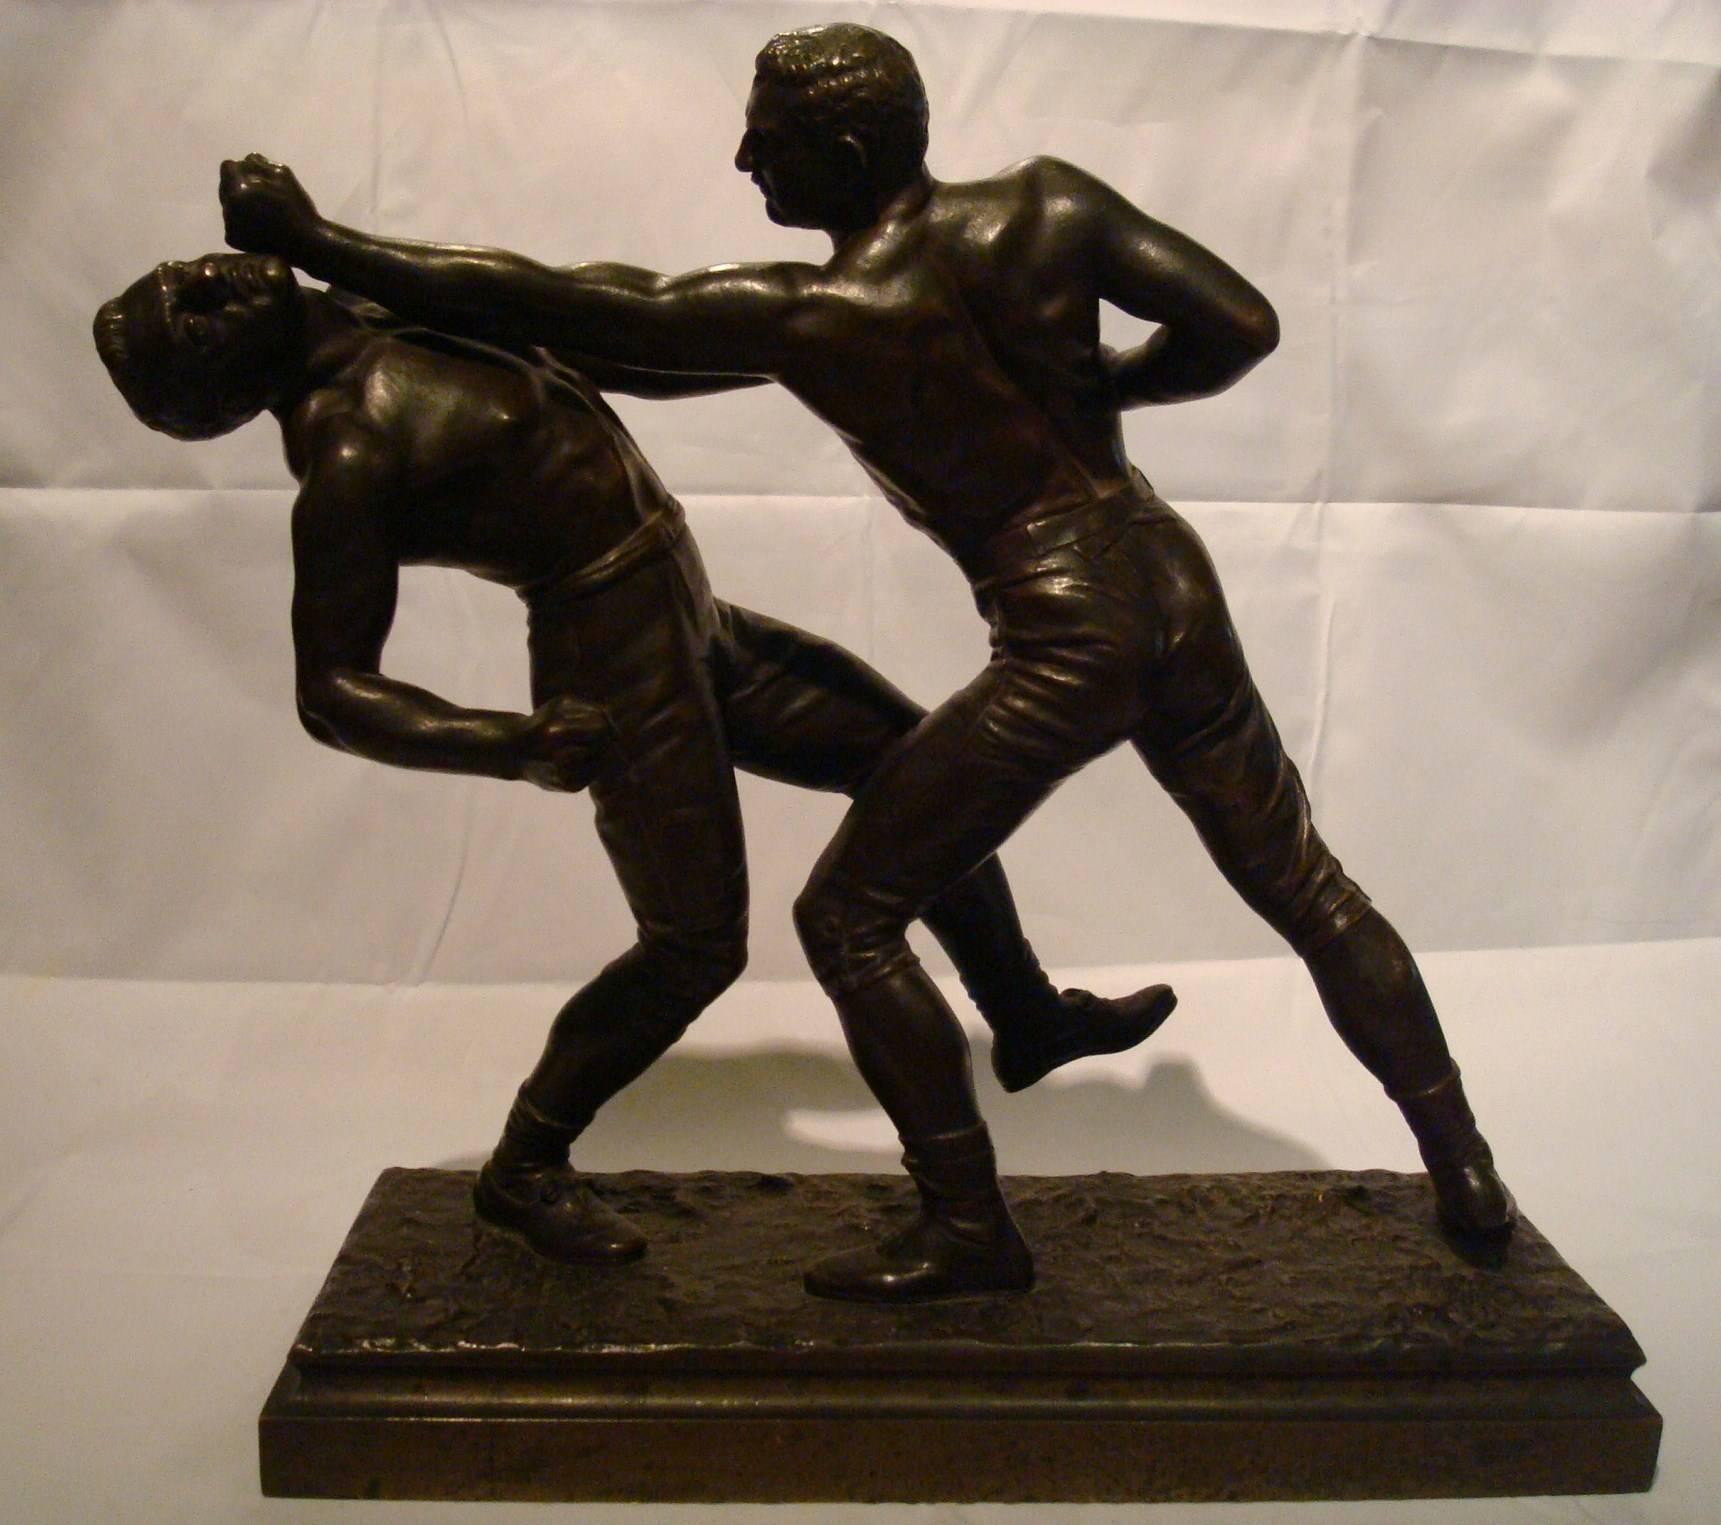 19th century French bronze pugilist boxers sculpture by Emile Hebert
Box bronze sculpture depicting two active bare-fisted, shirtless men boxing upon a naturalistic rectangular base. Signed 